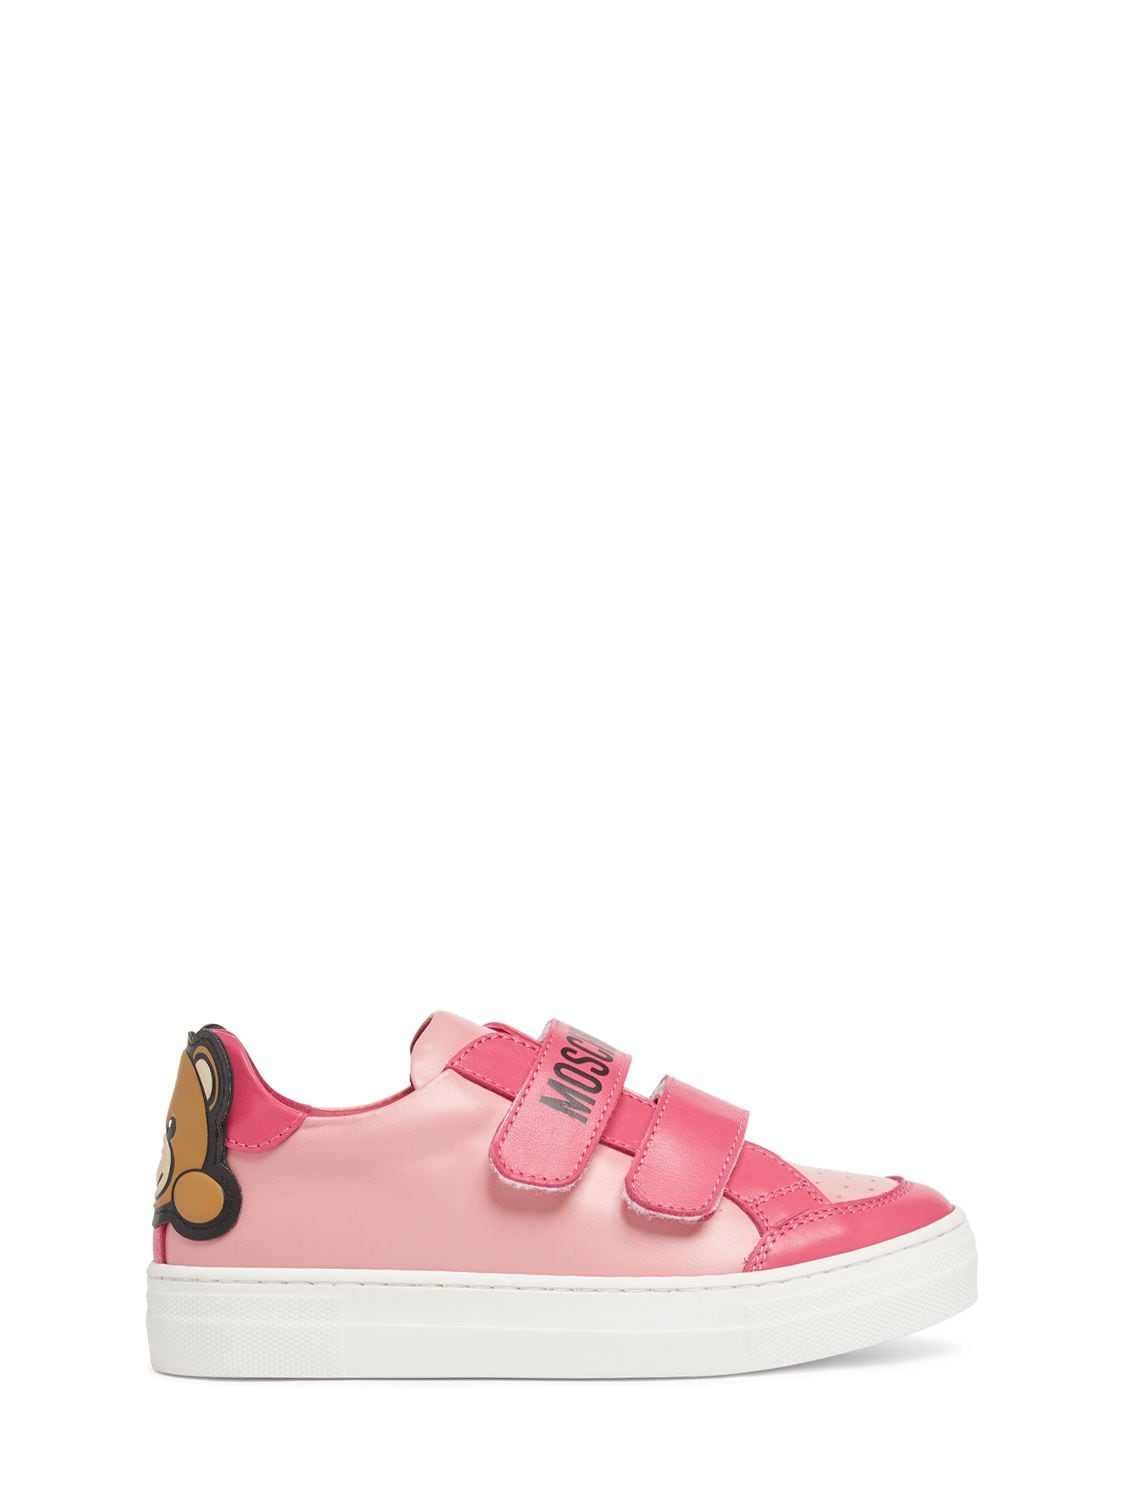 Moschino Kids' Leather Strap Sneakers W/logo In Pink